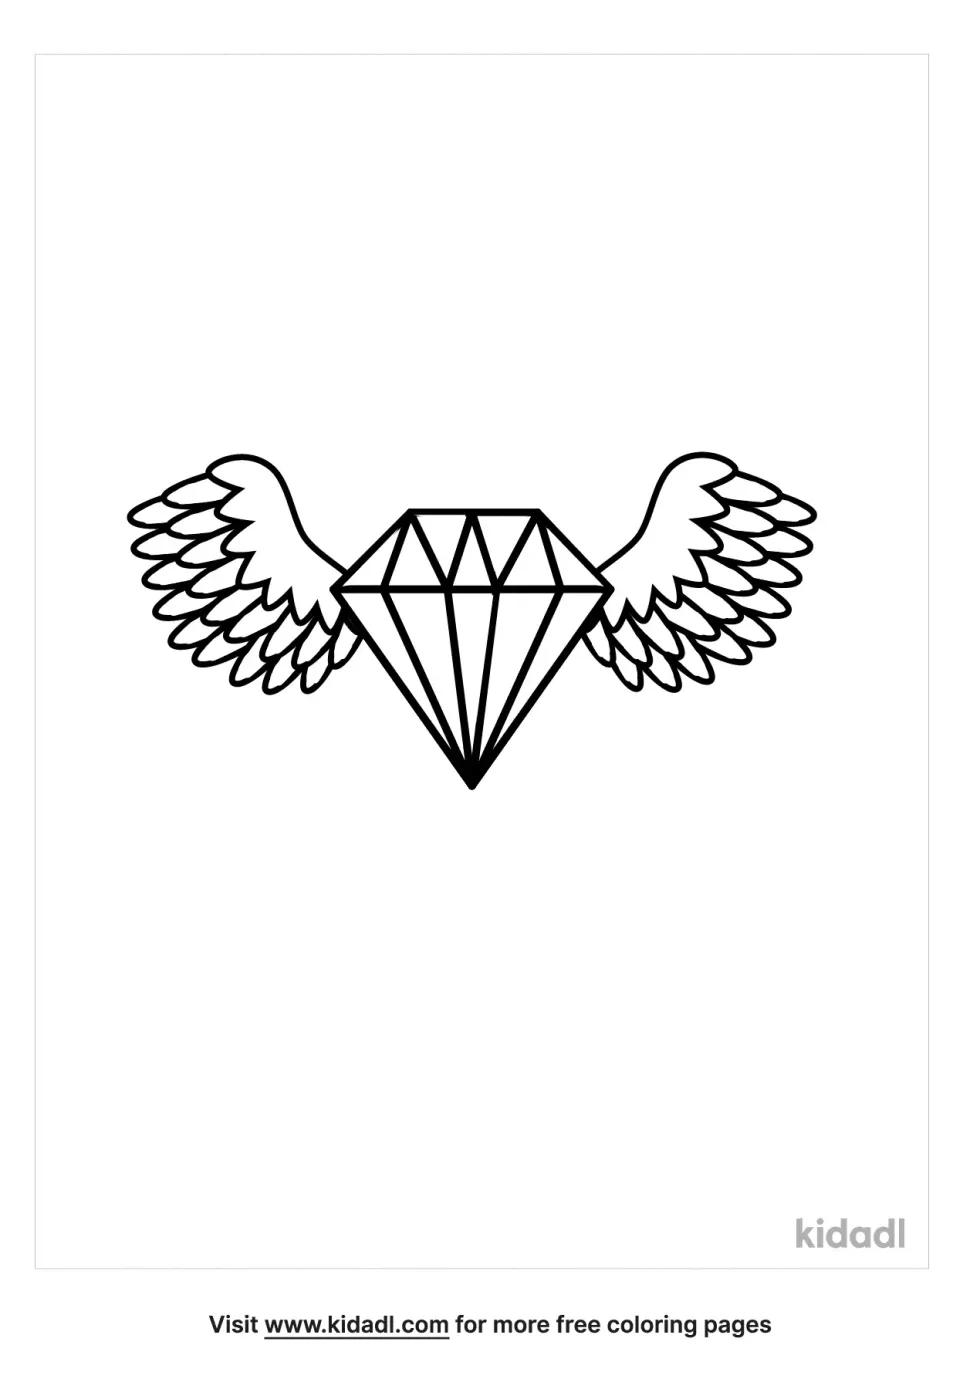 Diamonds With Wings Coloring Page